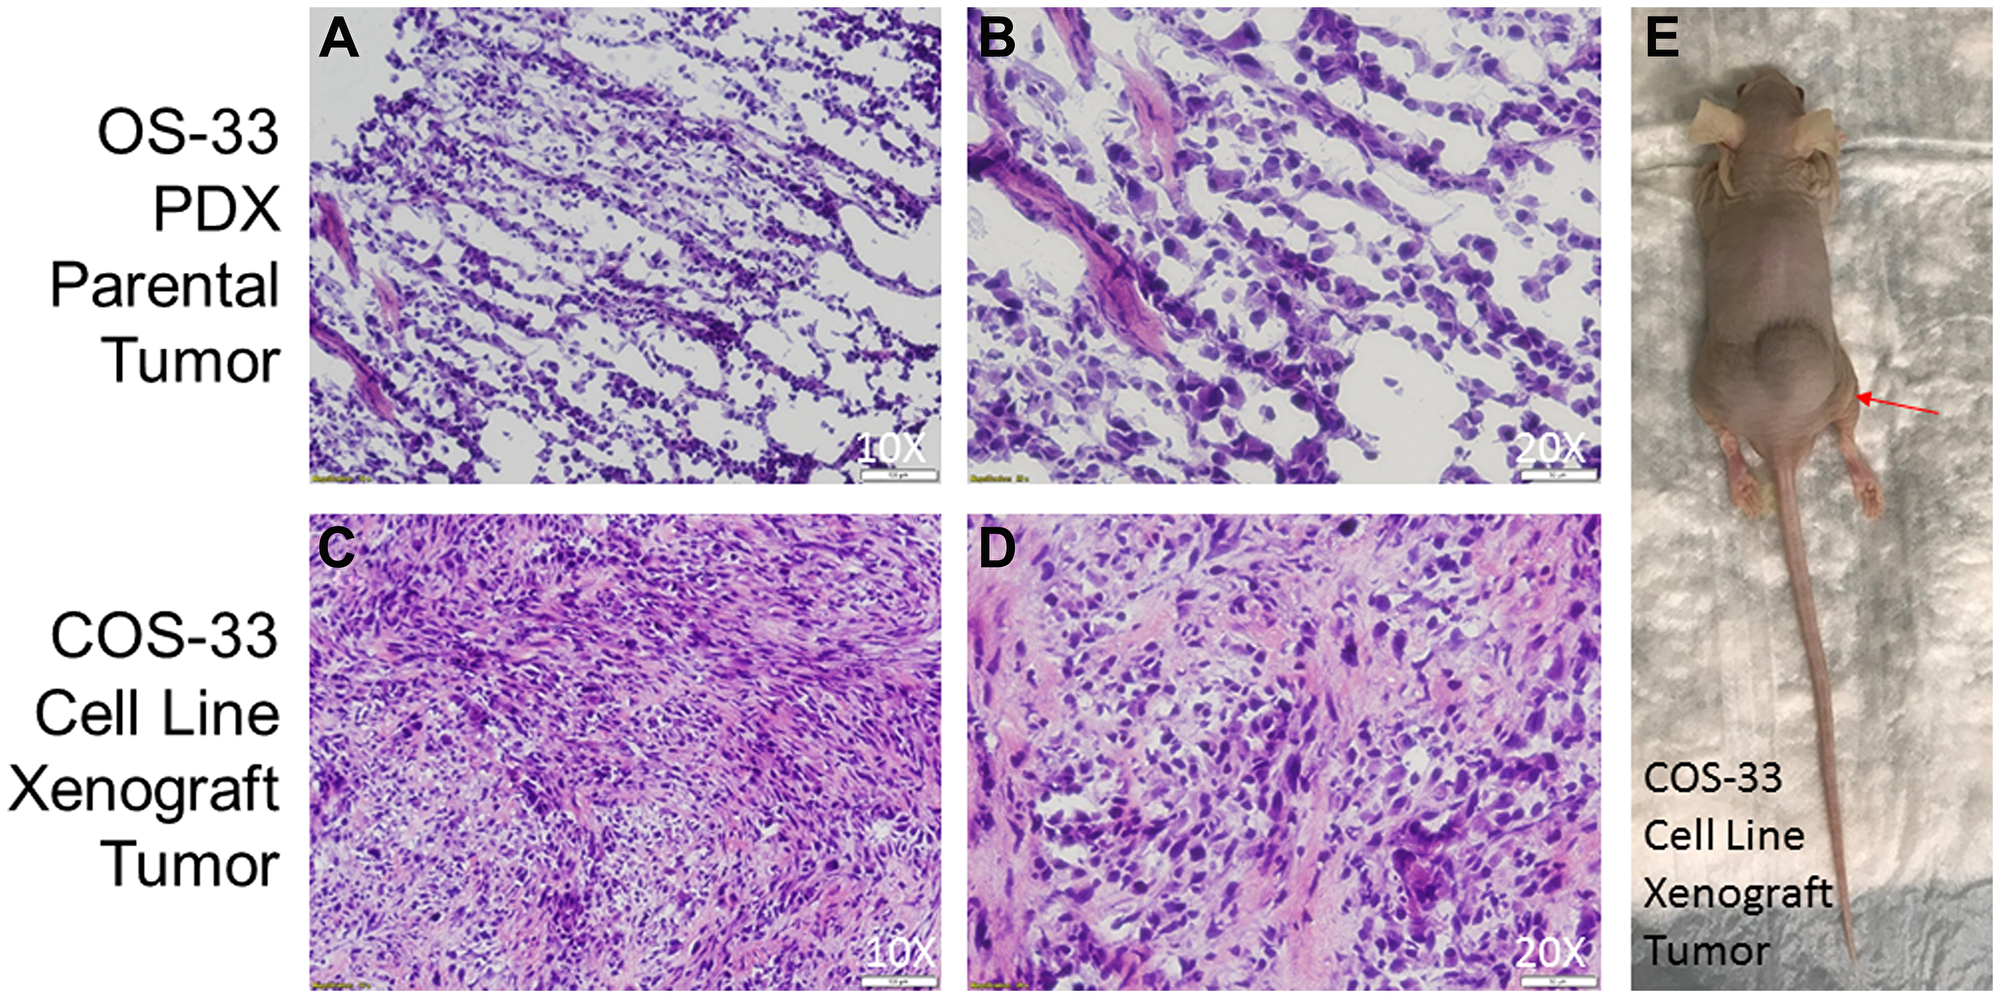 Figure 8: Photographs of histological sections of COS-33 tumors and the xenograft mouse.